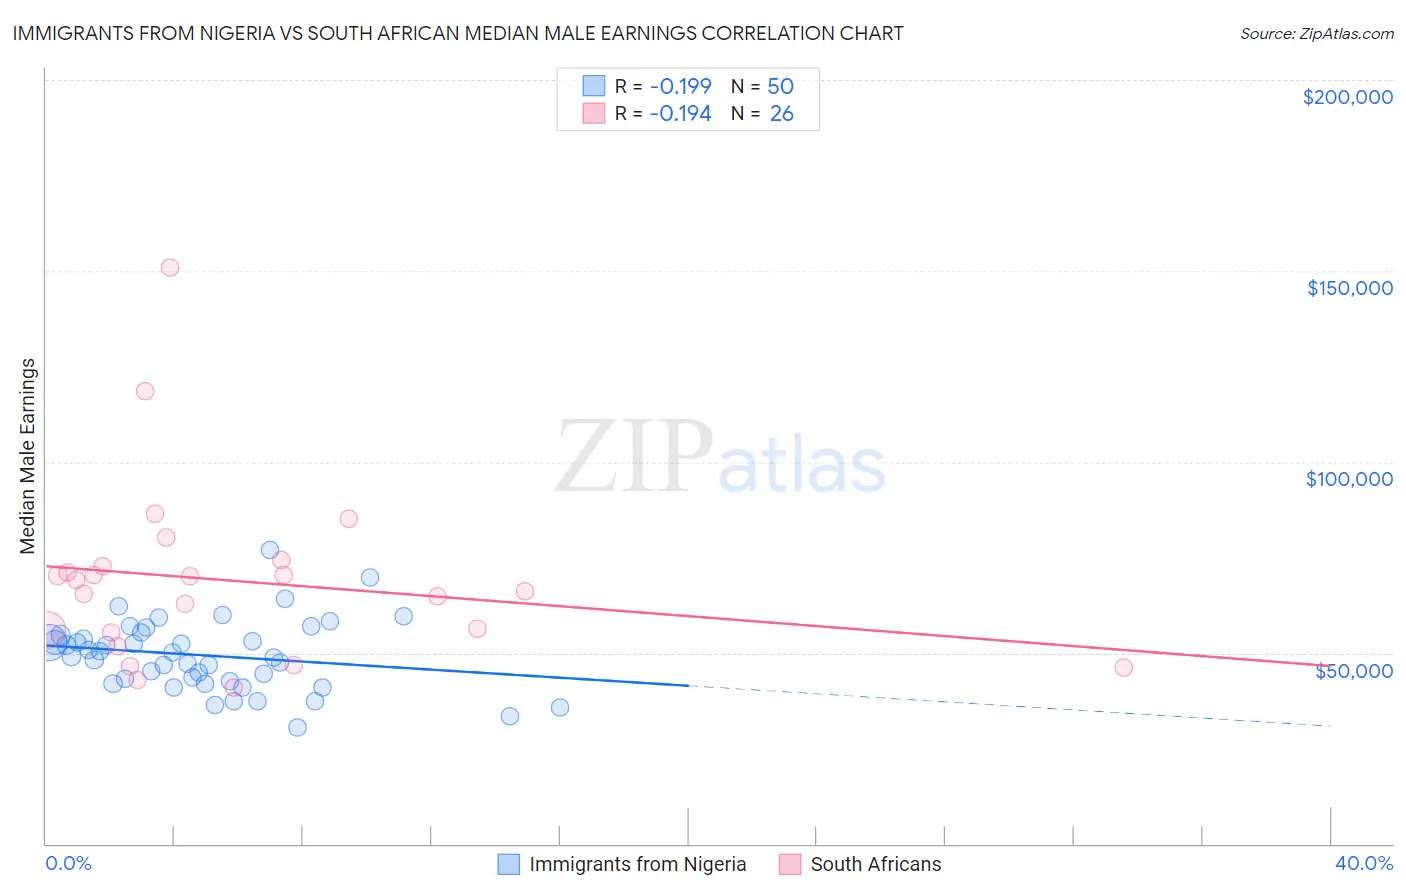 Immigrants from Nigeria vs South African Median Male Earnings